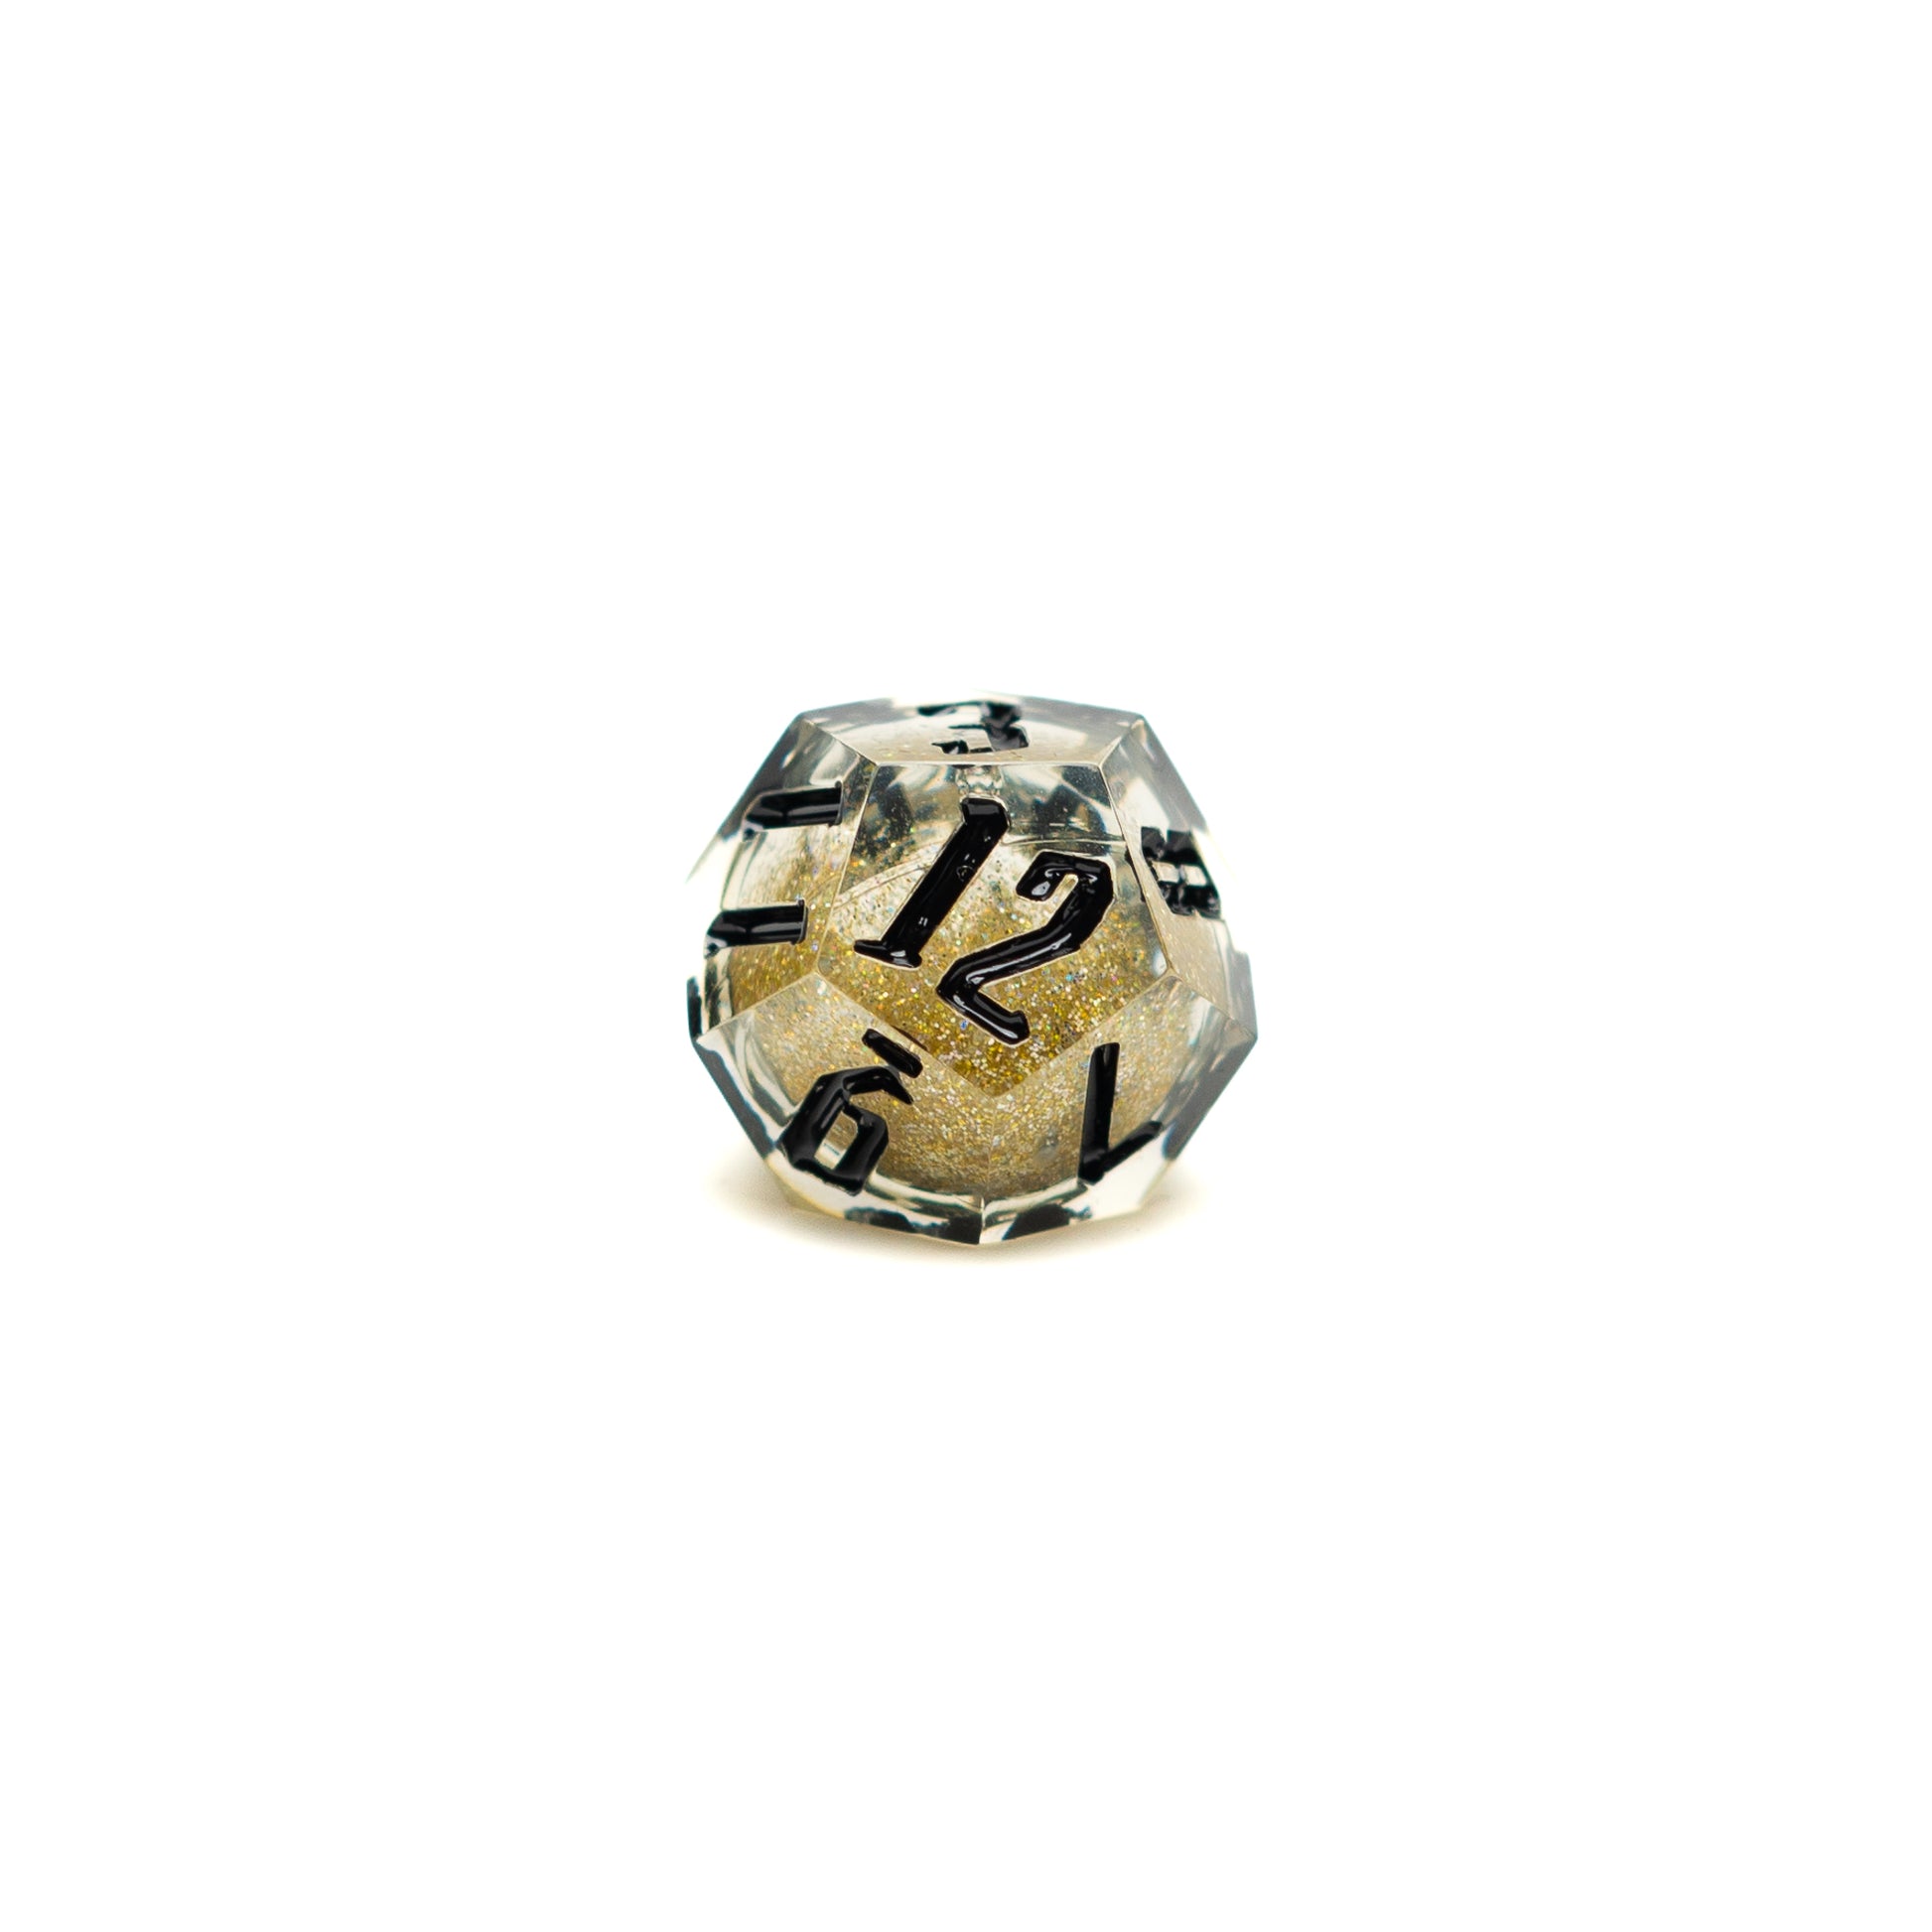 Roll Britannia Sharp Edge Resin Liquid Core Dungeons and Dragons D12 Dice with Gold Glitter Aesthetic